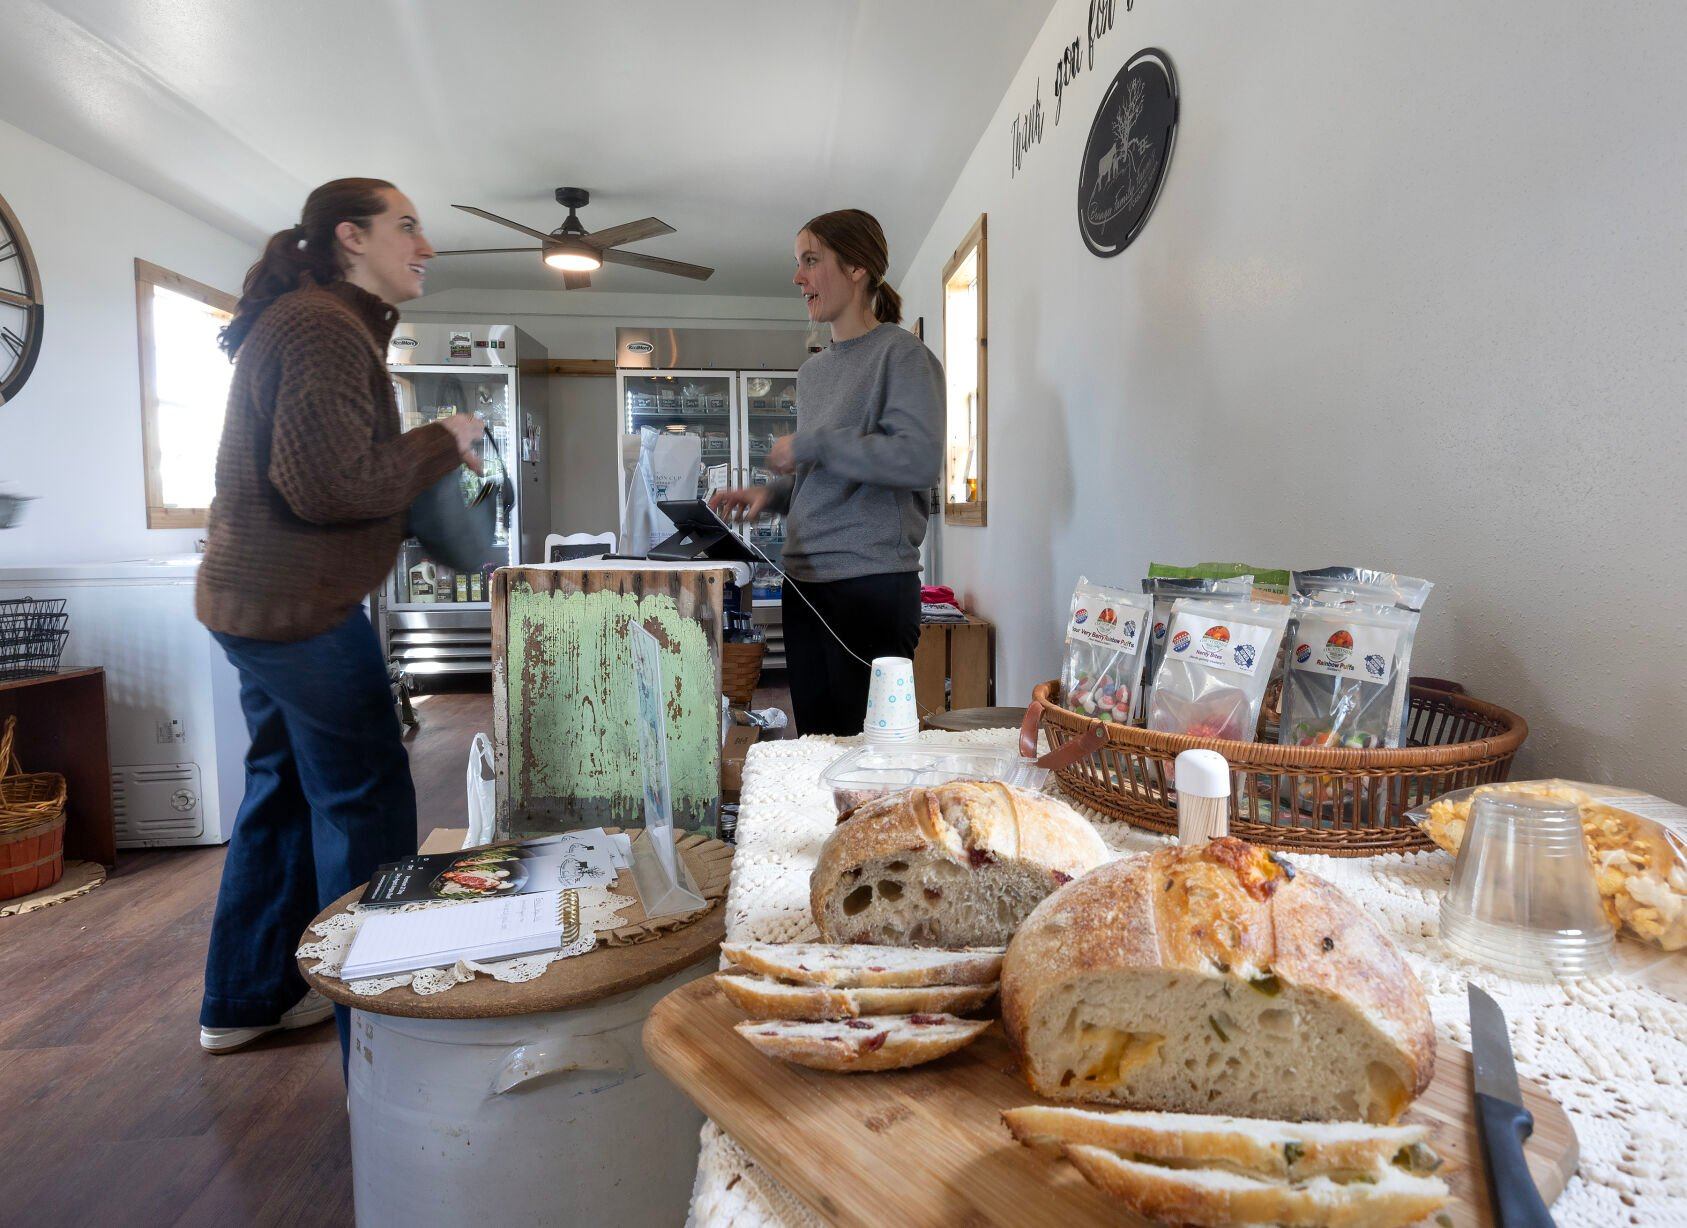 Lillie Beringer (right) waits on Sarah Knabel on Friday at Beringer Family Farms Store, which recently opened as a one-stop-shop farmers market on the family’s farm in Cascade, Iowa.    PHOTO CREDIT: Gassman